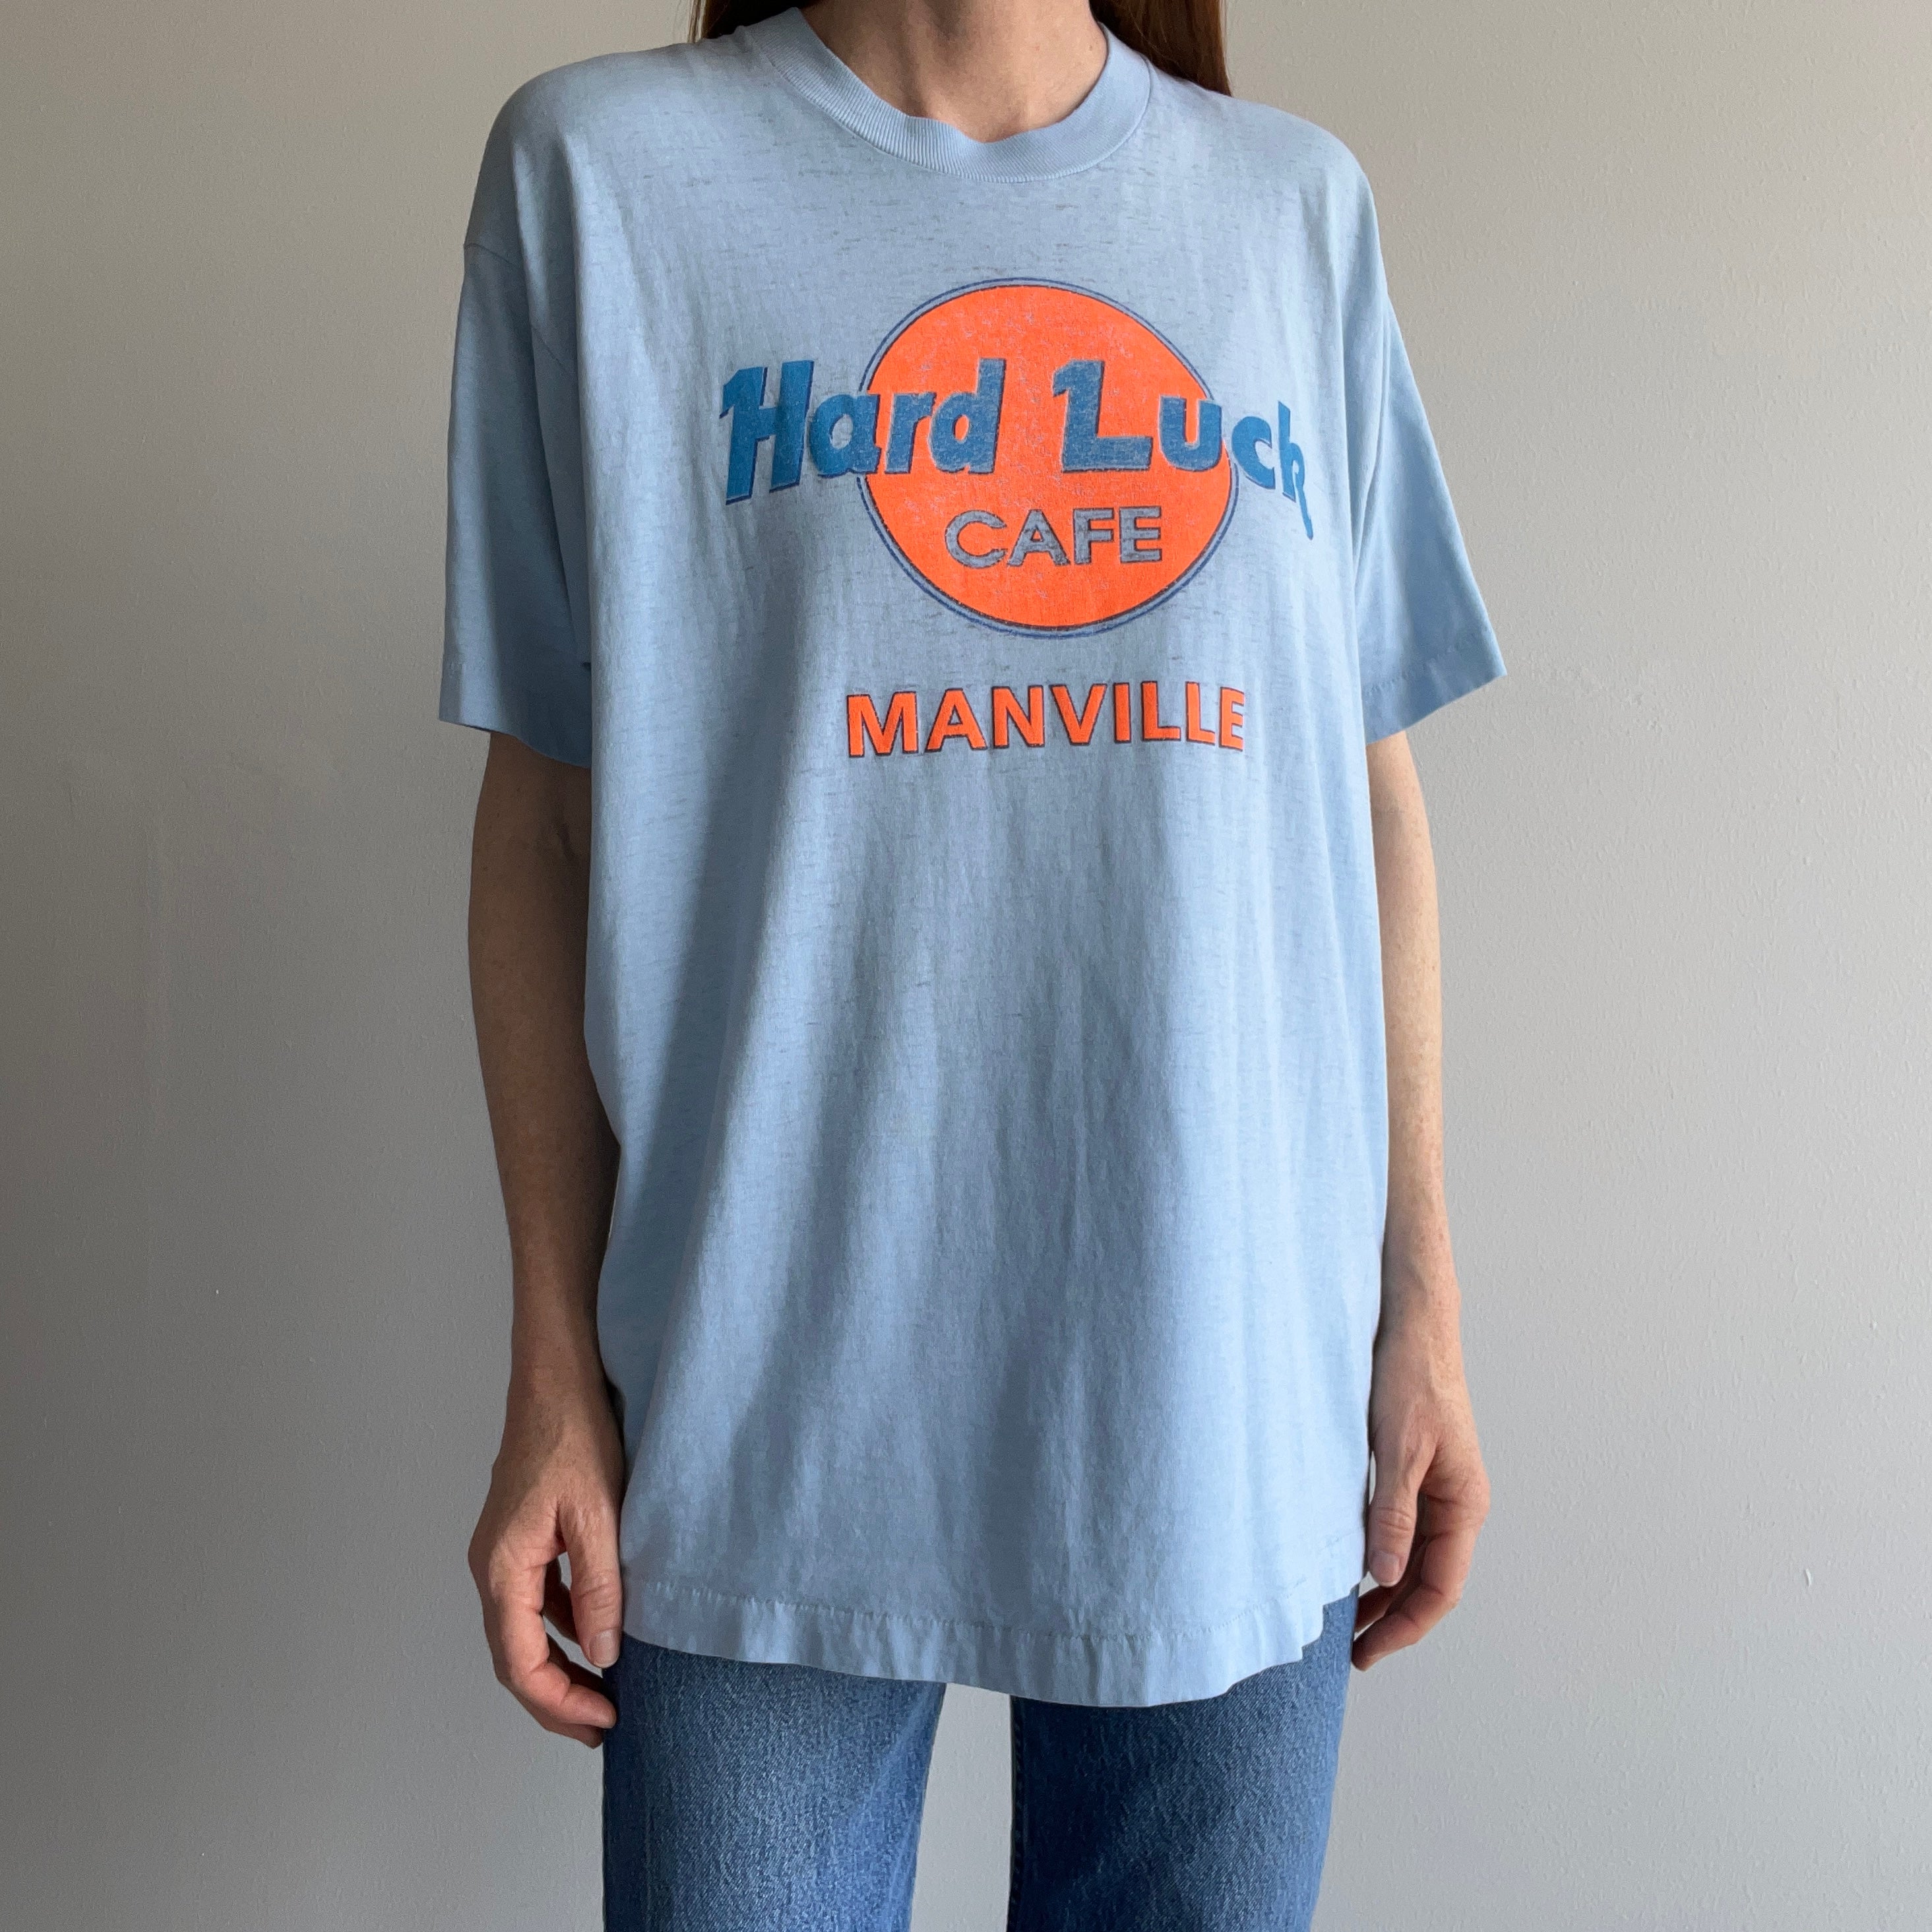 1990s Thinned Out Hard Luck T-Shirt